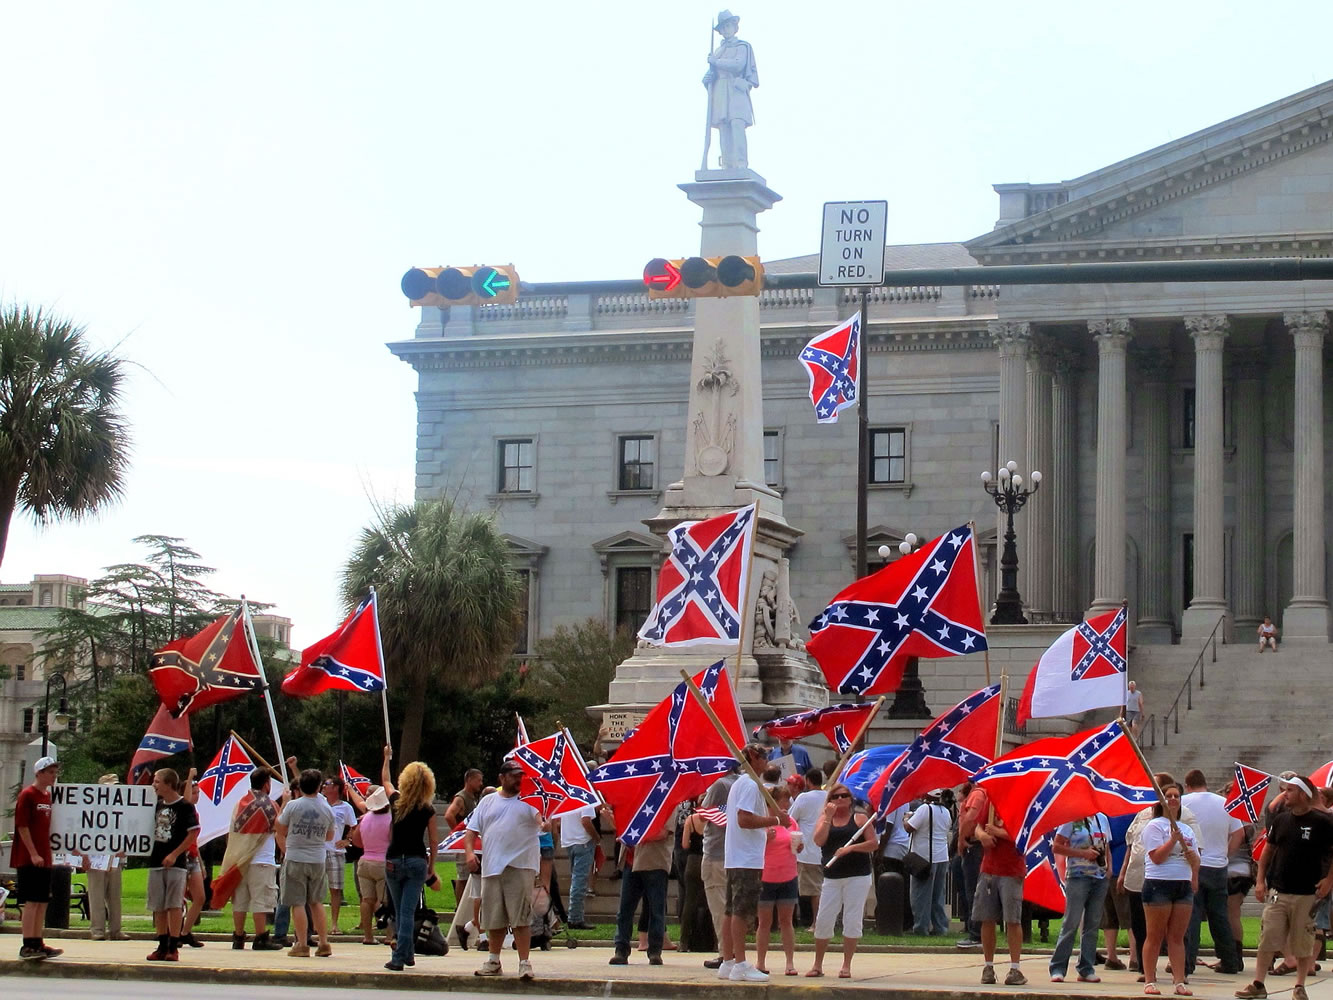 Supporters of keeping the Confederate battle flag flying at a Confederate monument at the South Carolina Statehouse wave flags during a rally Saturday in front of the statehouse in Columbia, S.C.